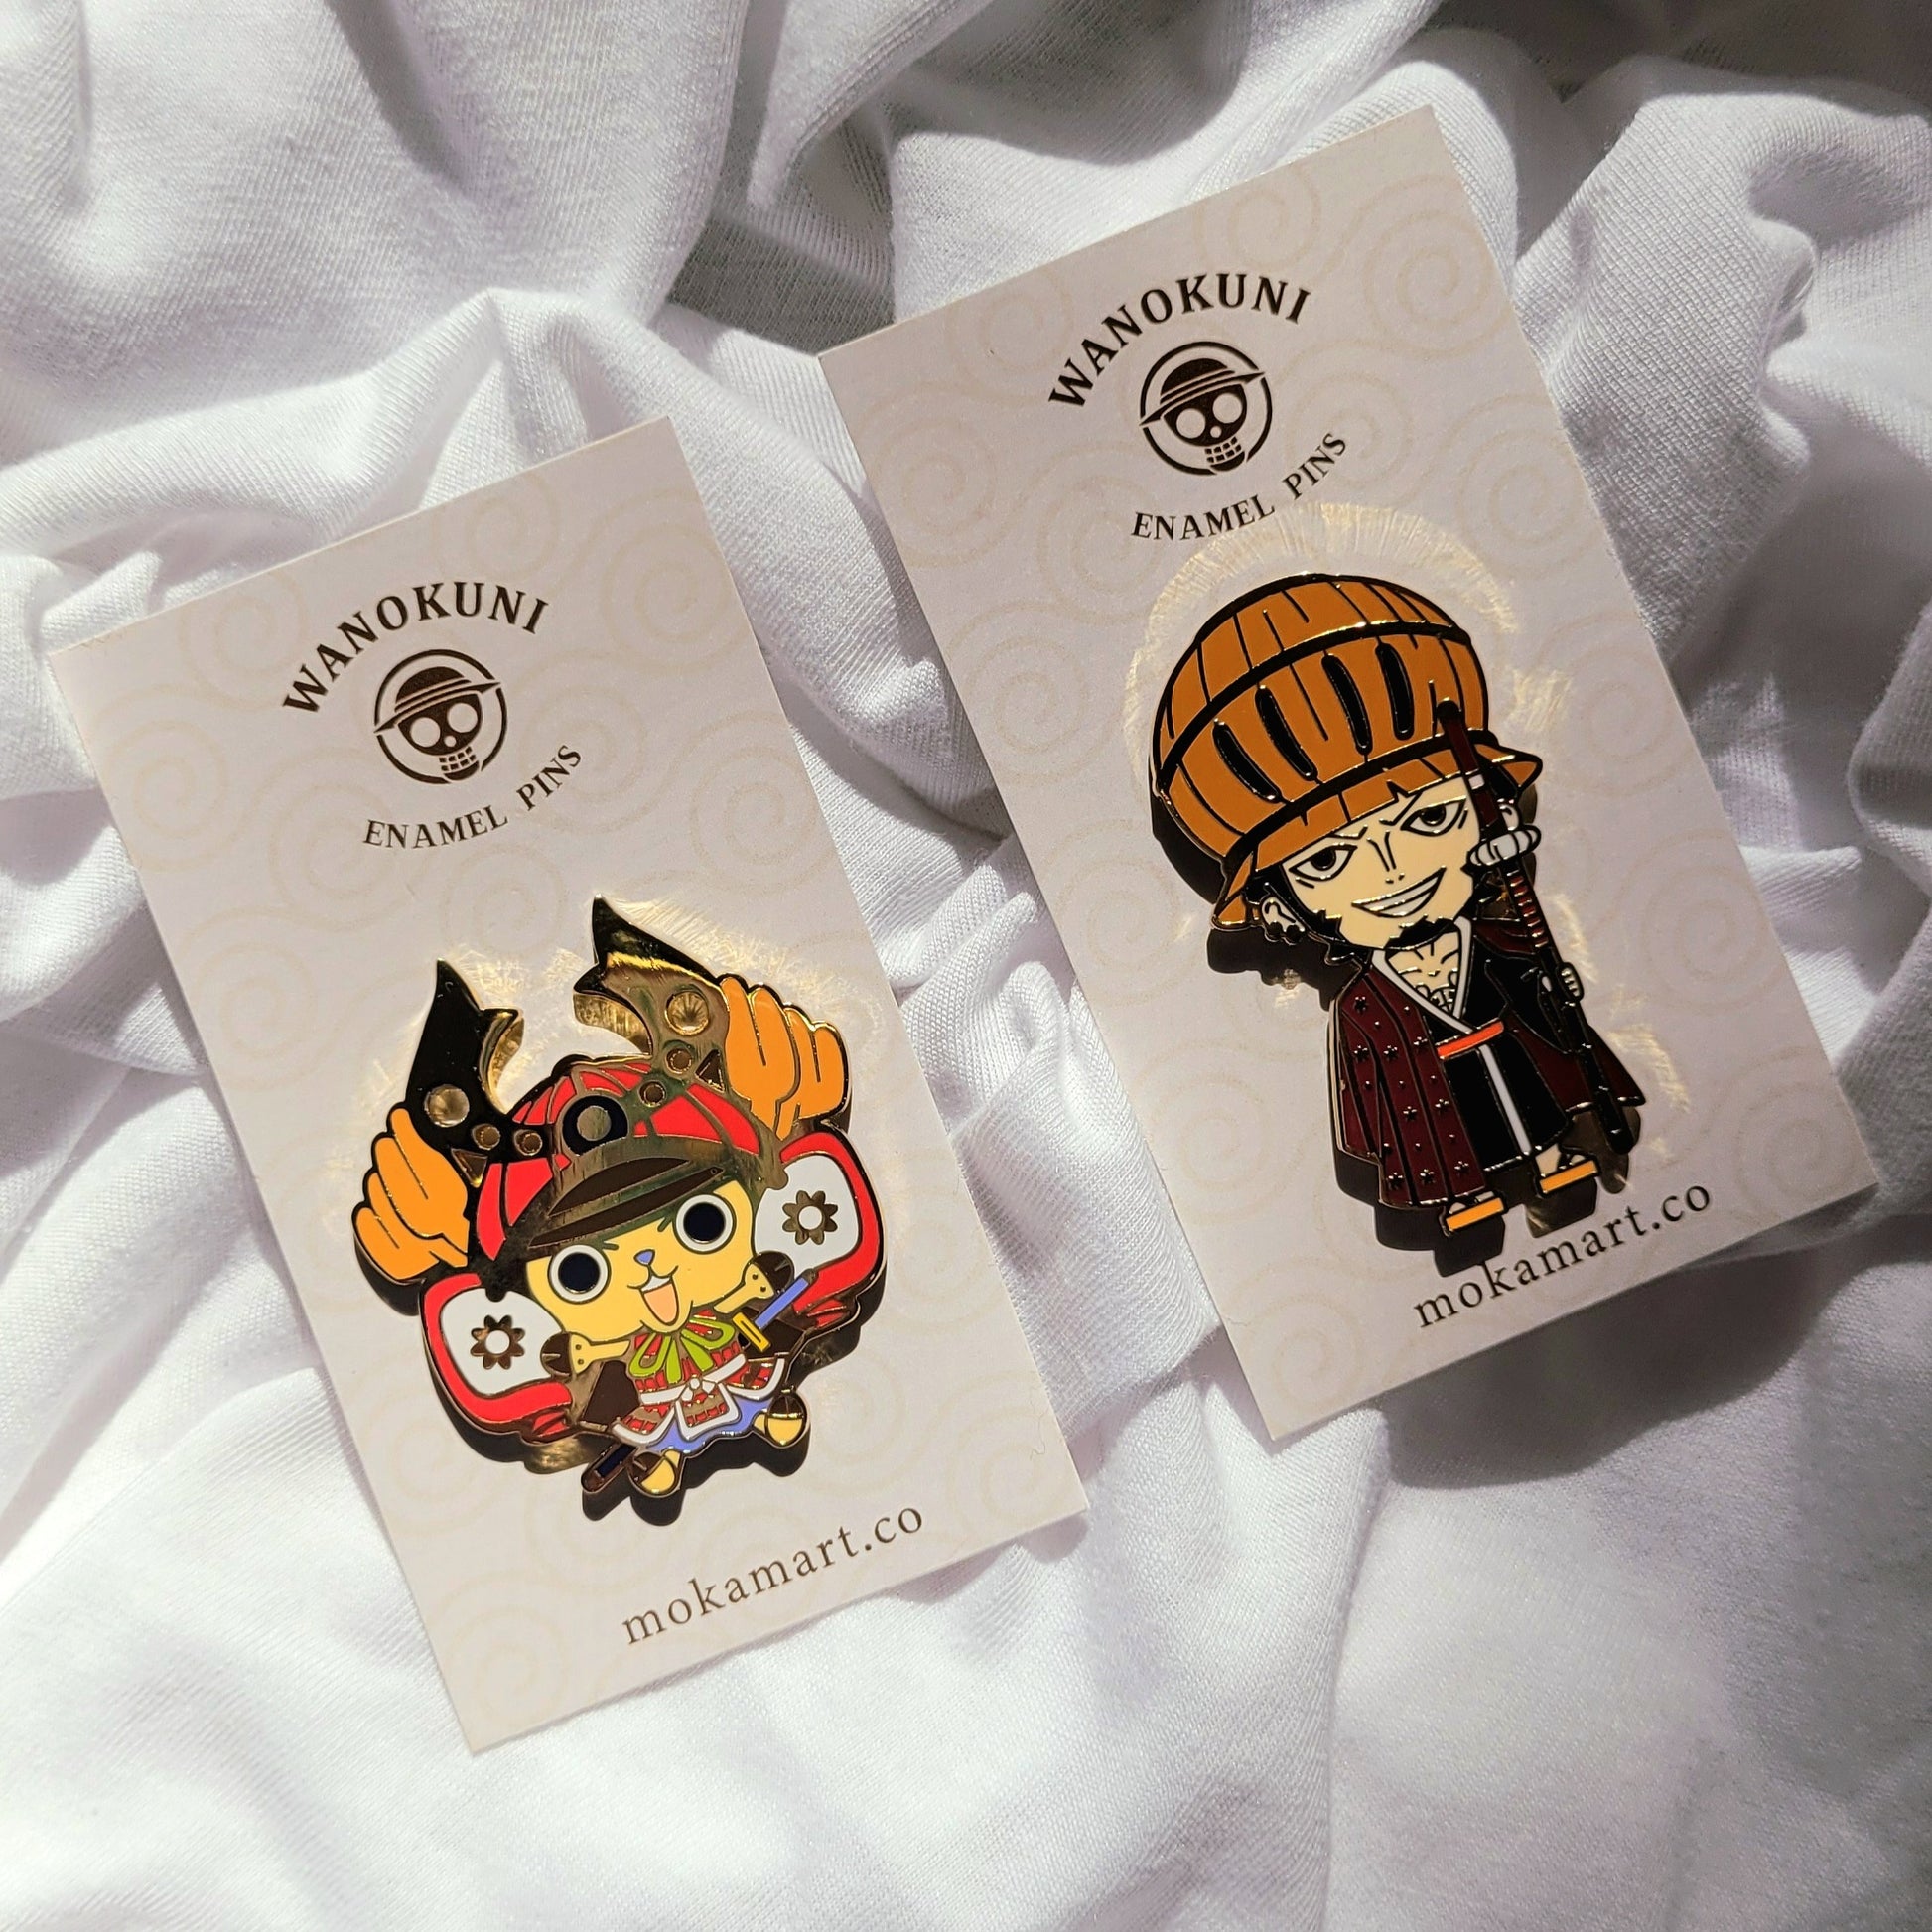 One Piece Enamel Pins Buy/Sell/Trade